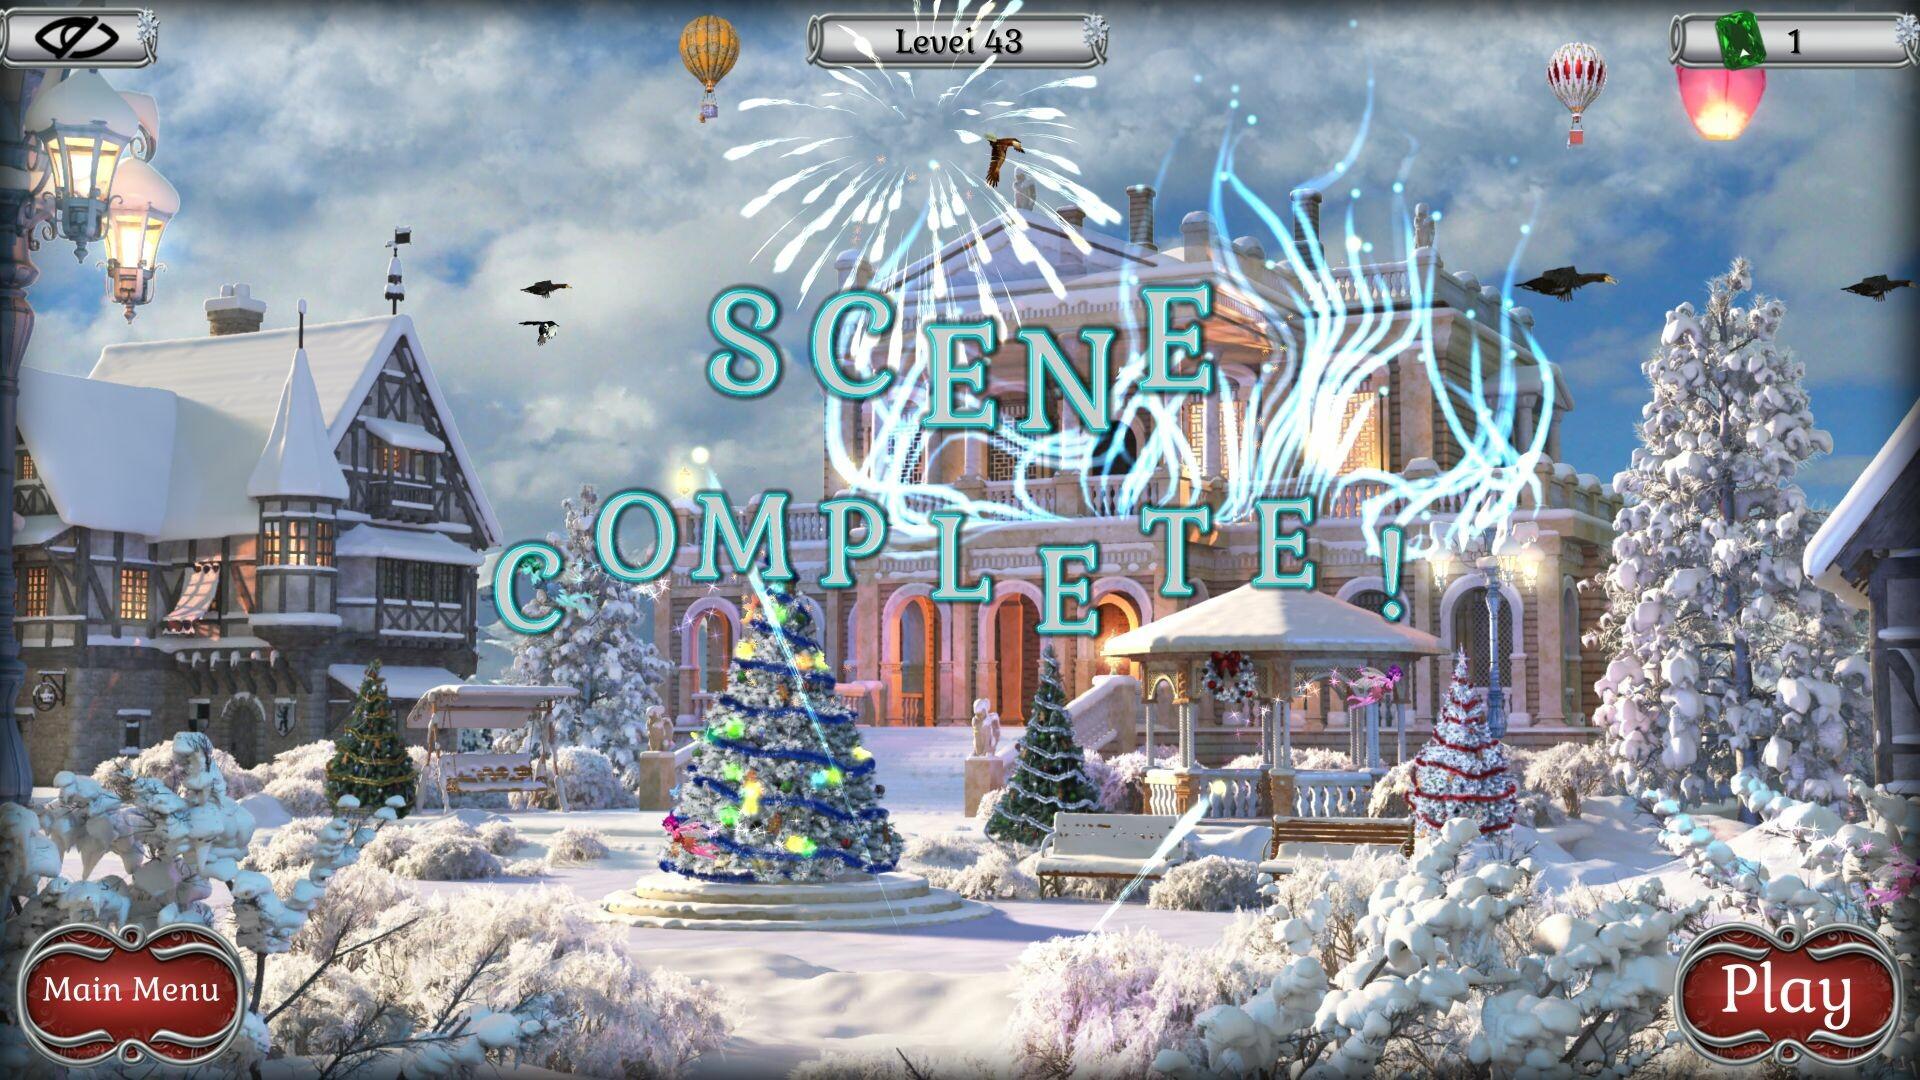 Jewel Match Solitaire: Winterscapes 2 Collector's Edition 게임 스크린 샷